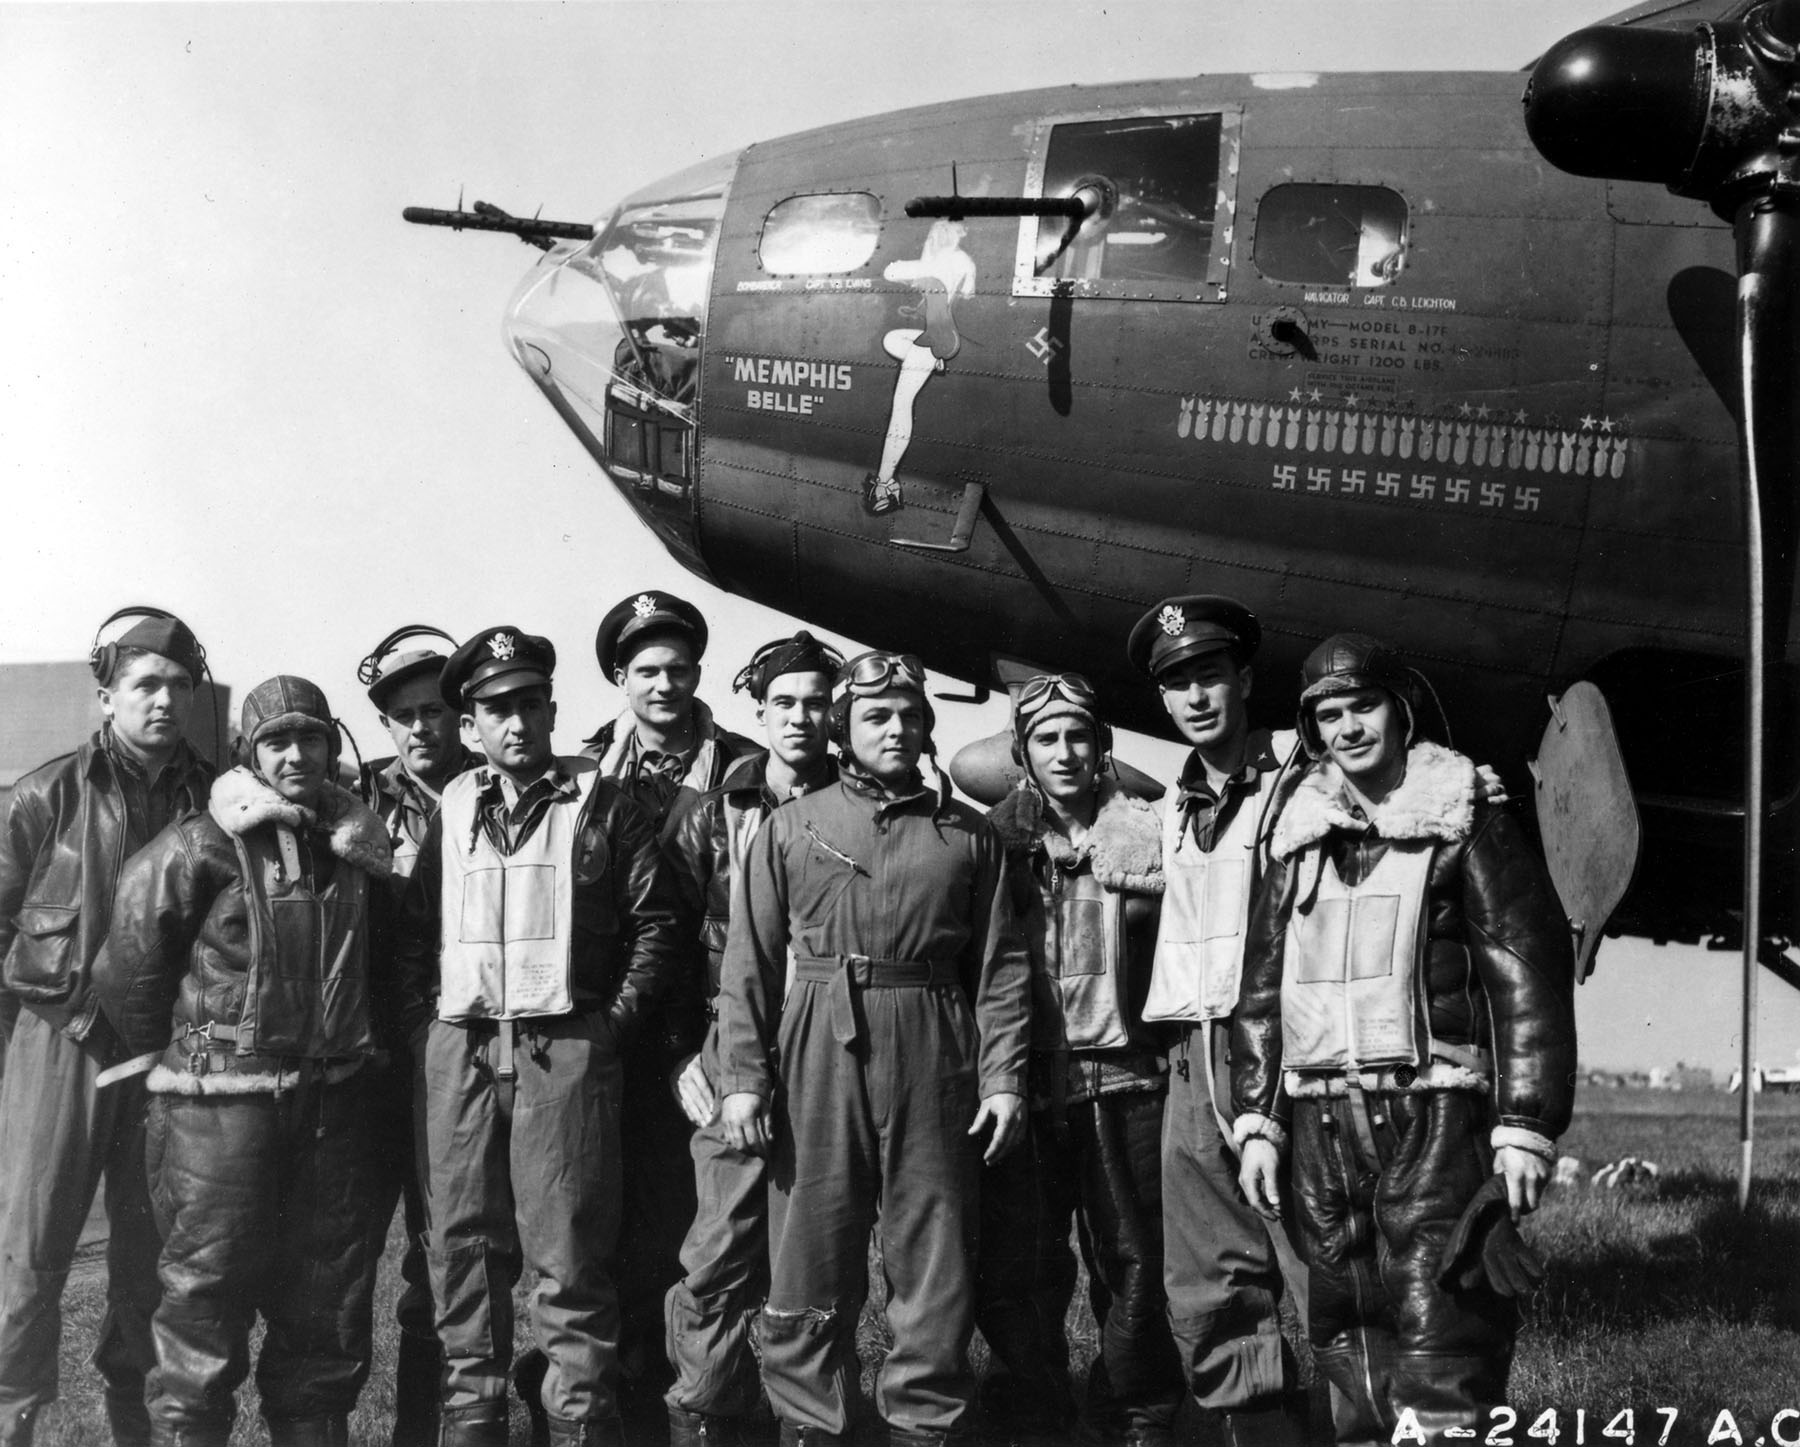 The Memphis Belle and other iconic US Air Force aircraft, and stories of the missions they were involved in, will be focus of ASU Polytechnic campus lecture